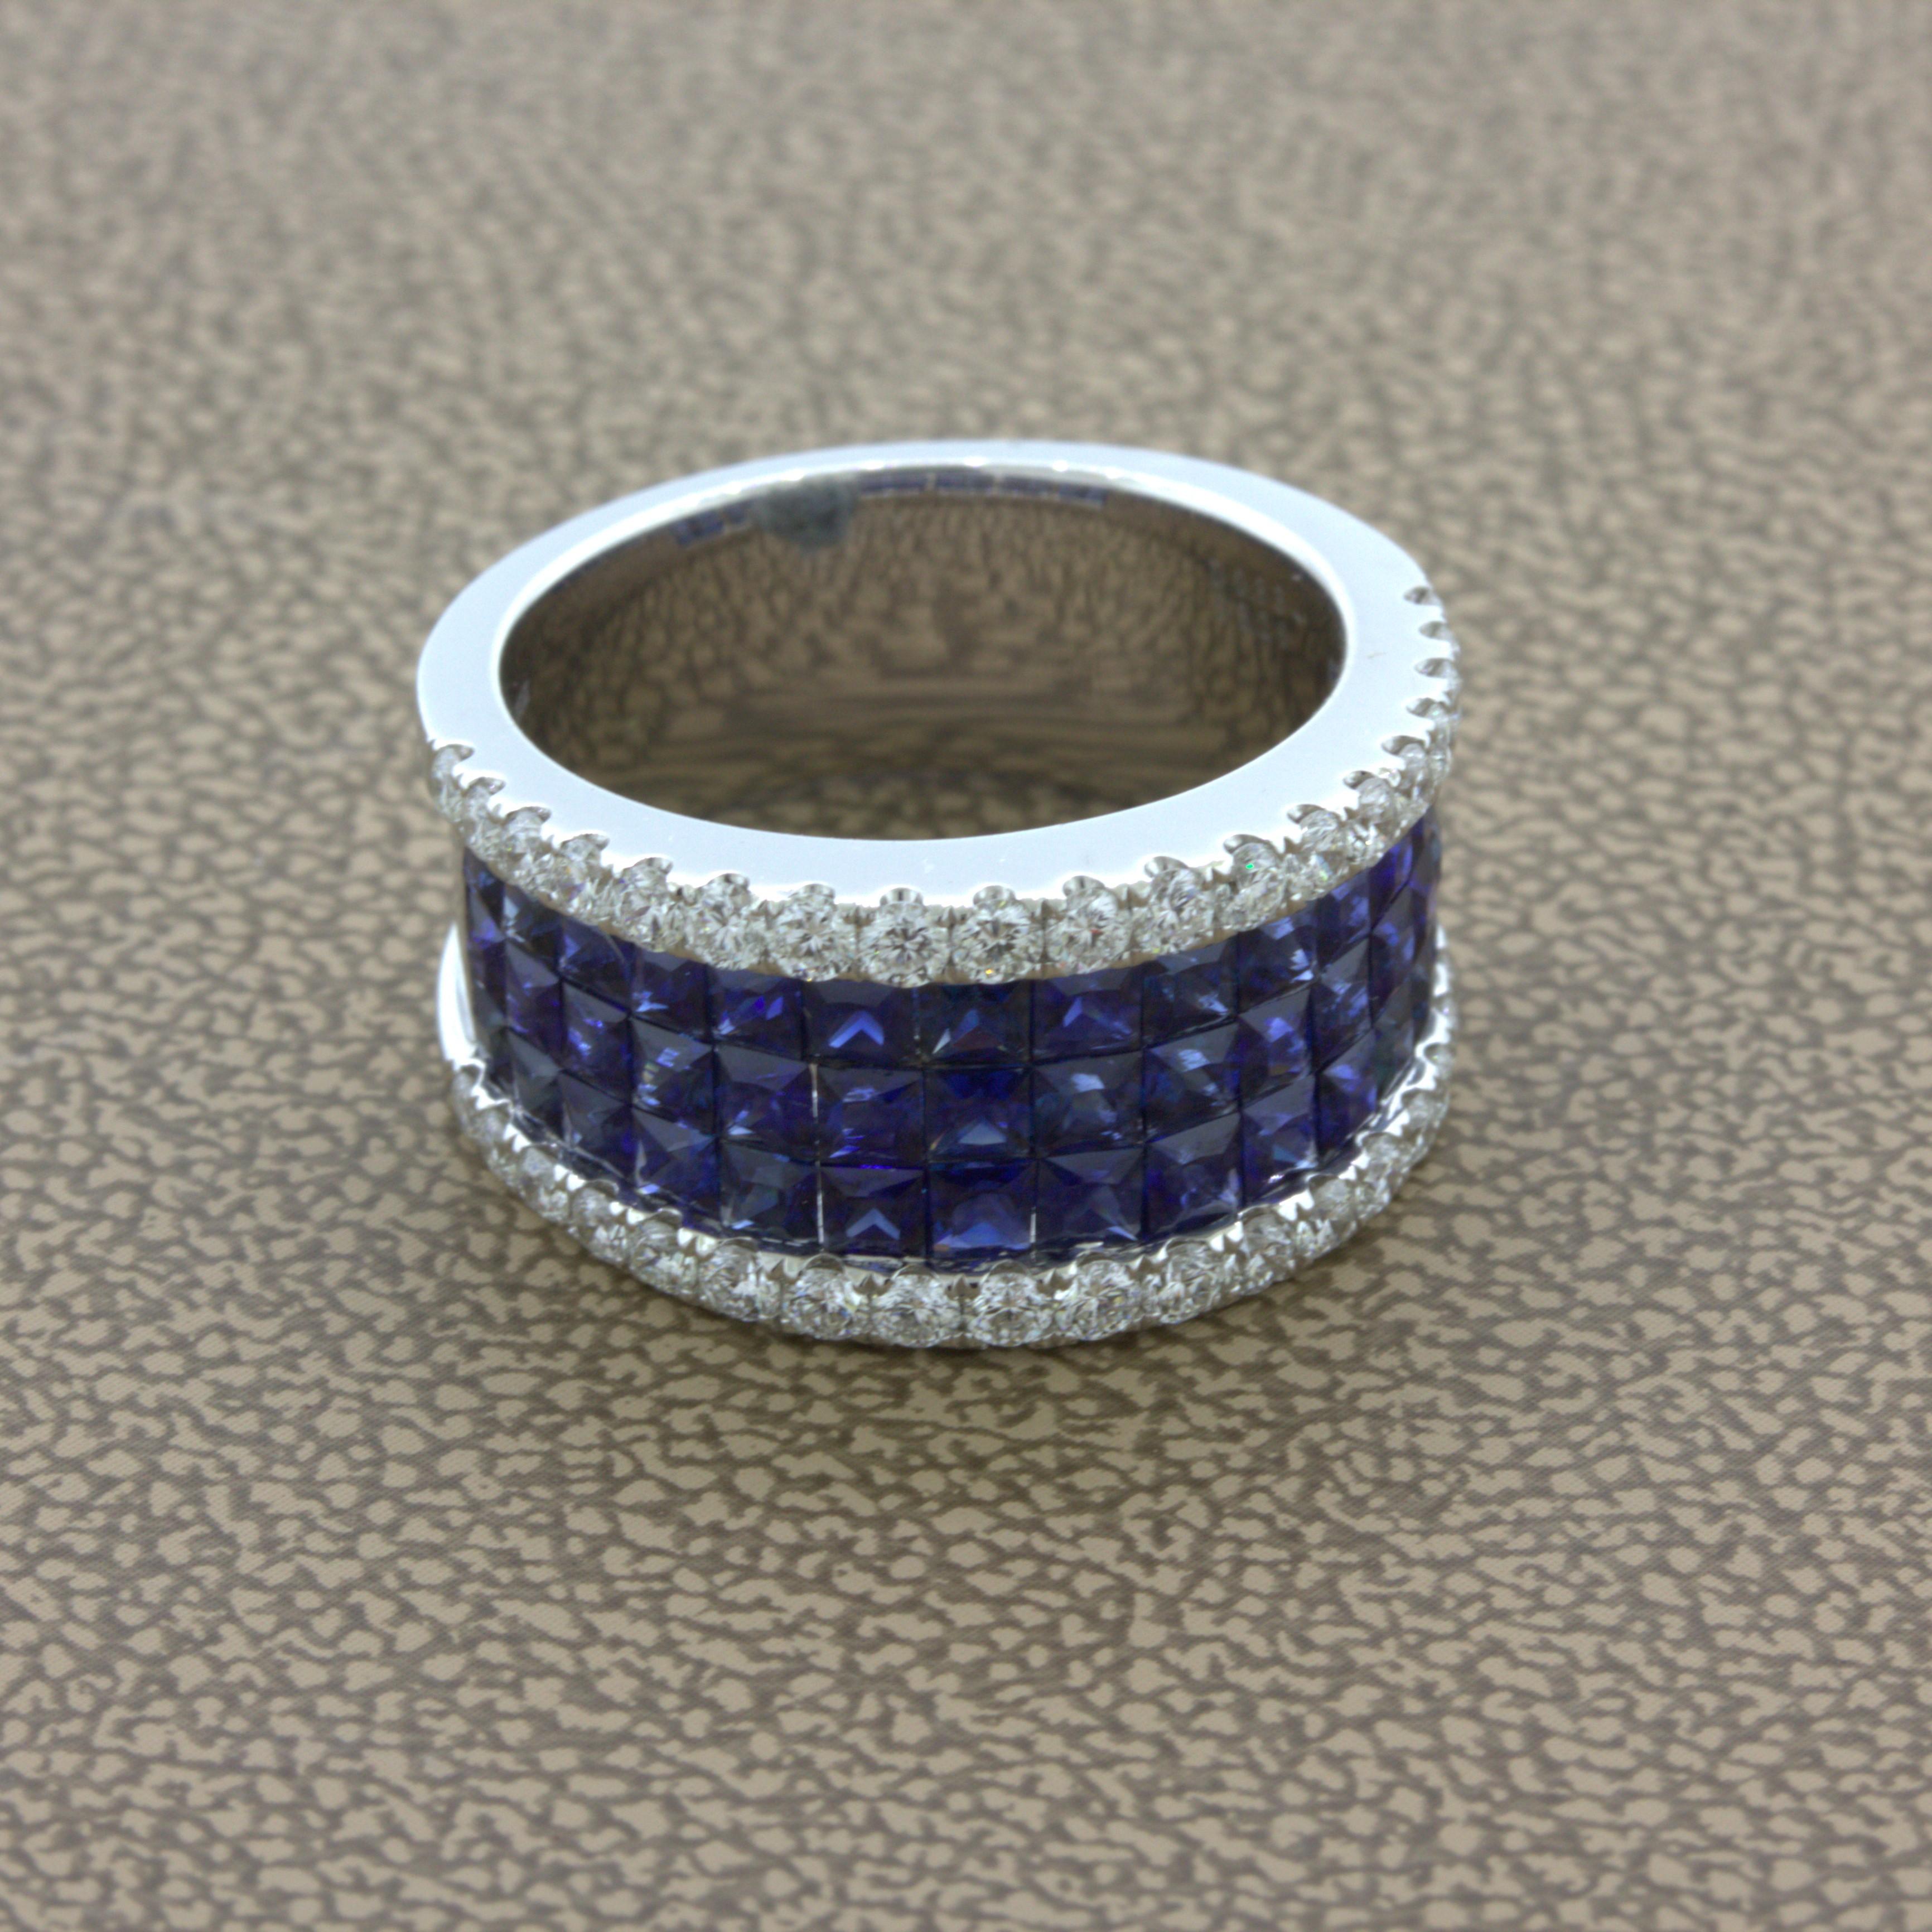 A chic and stylish wide band featuring 3.26 carats of invisible set blue sapphire. Invisible setting was first introduced by Van Cleef. It is a special technique where stones are set side by side without any metal showing, making them appear to be